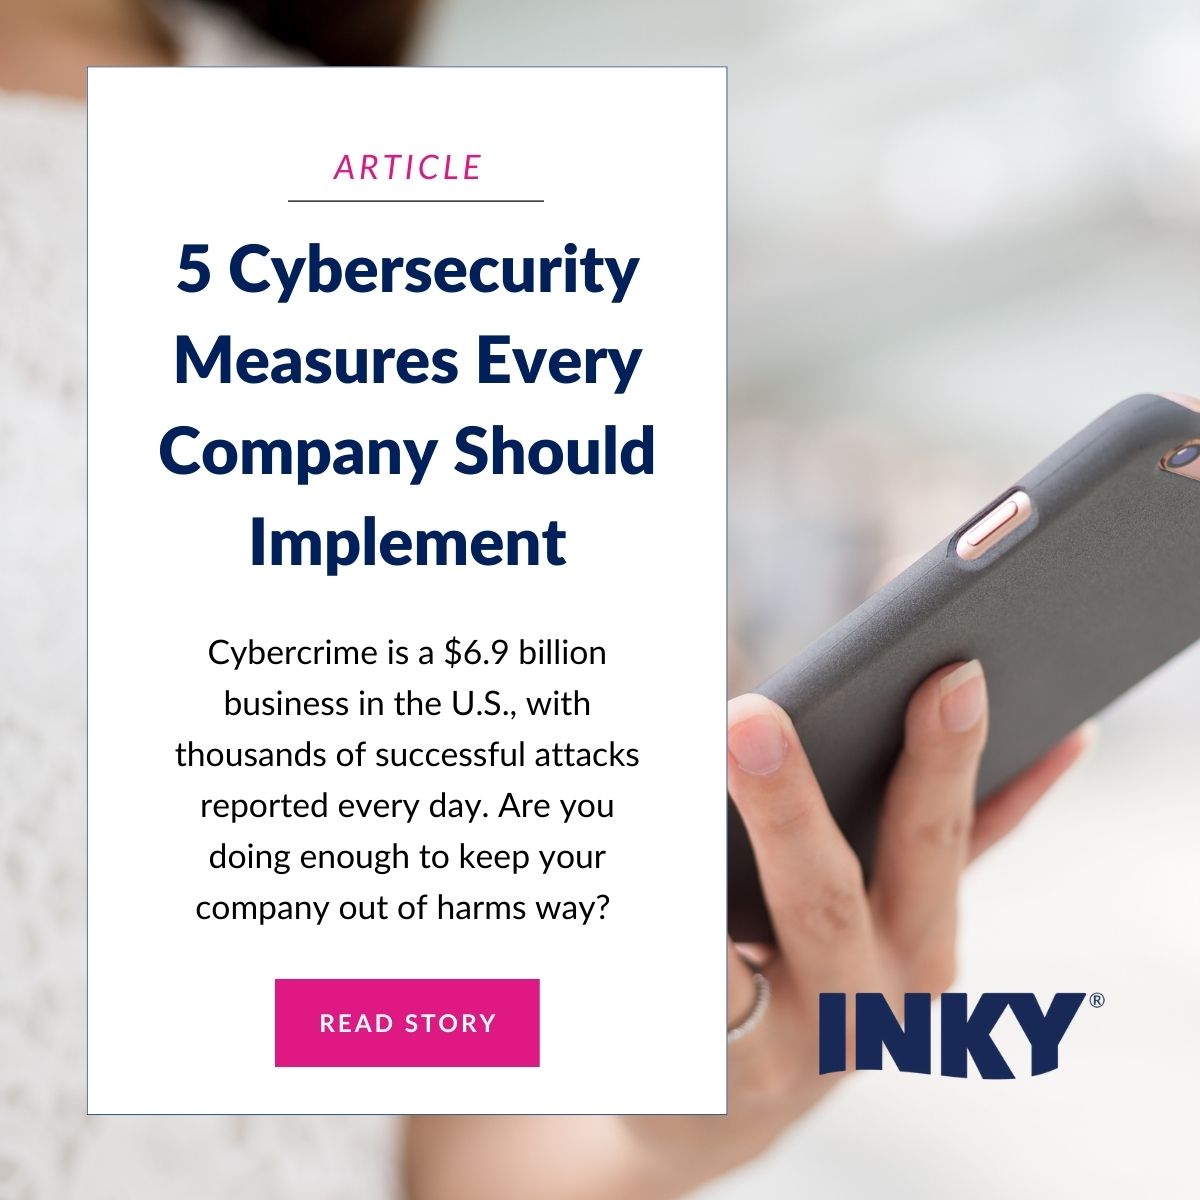 5 Cybersecurity Measures Every Company Should Implement